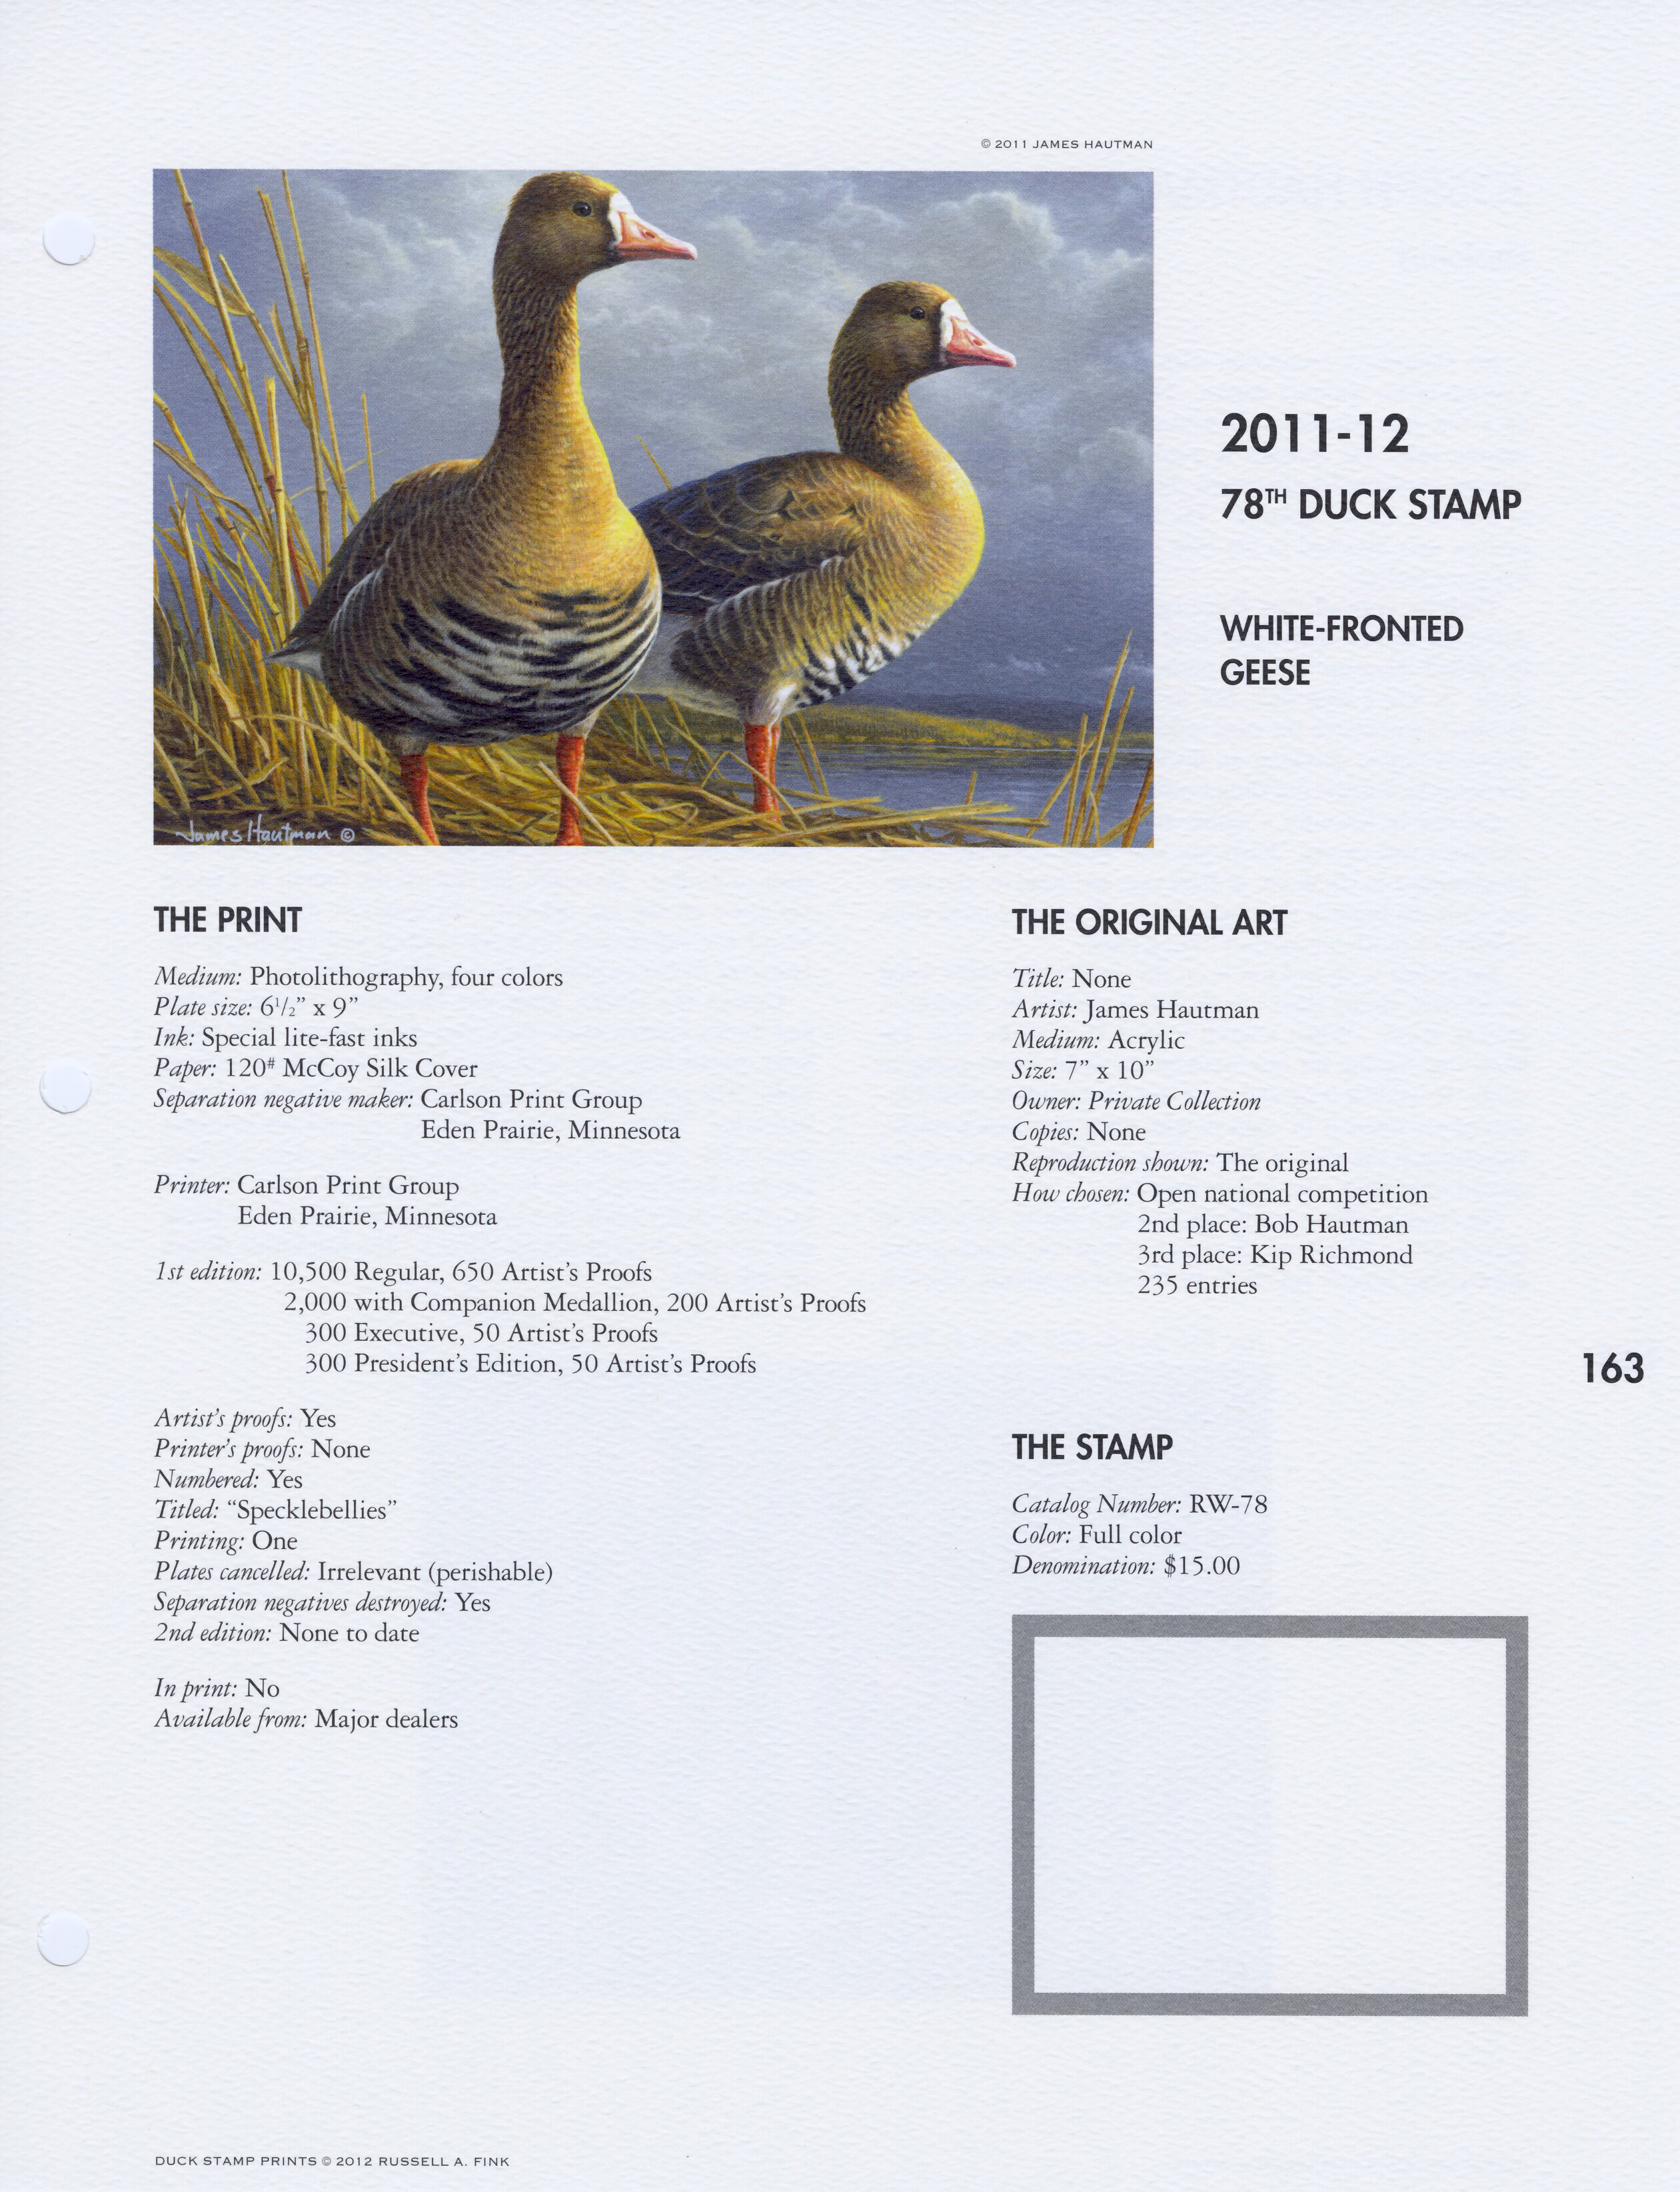 2011-12 White-fronted Geese by James Hautman